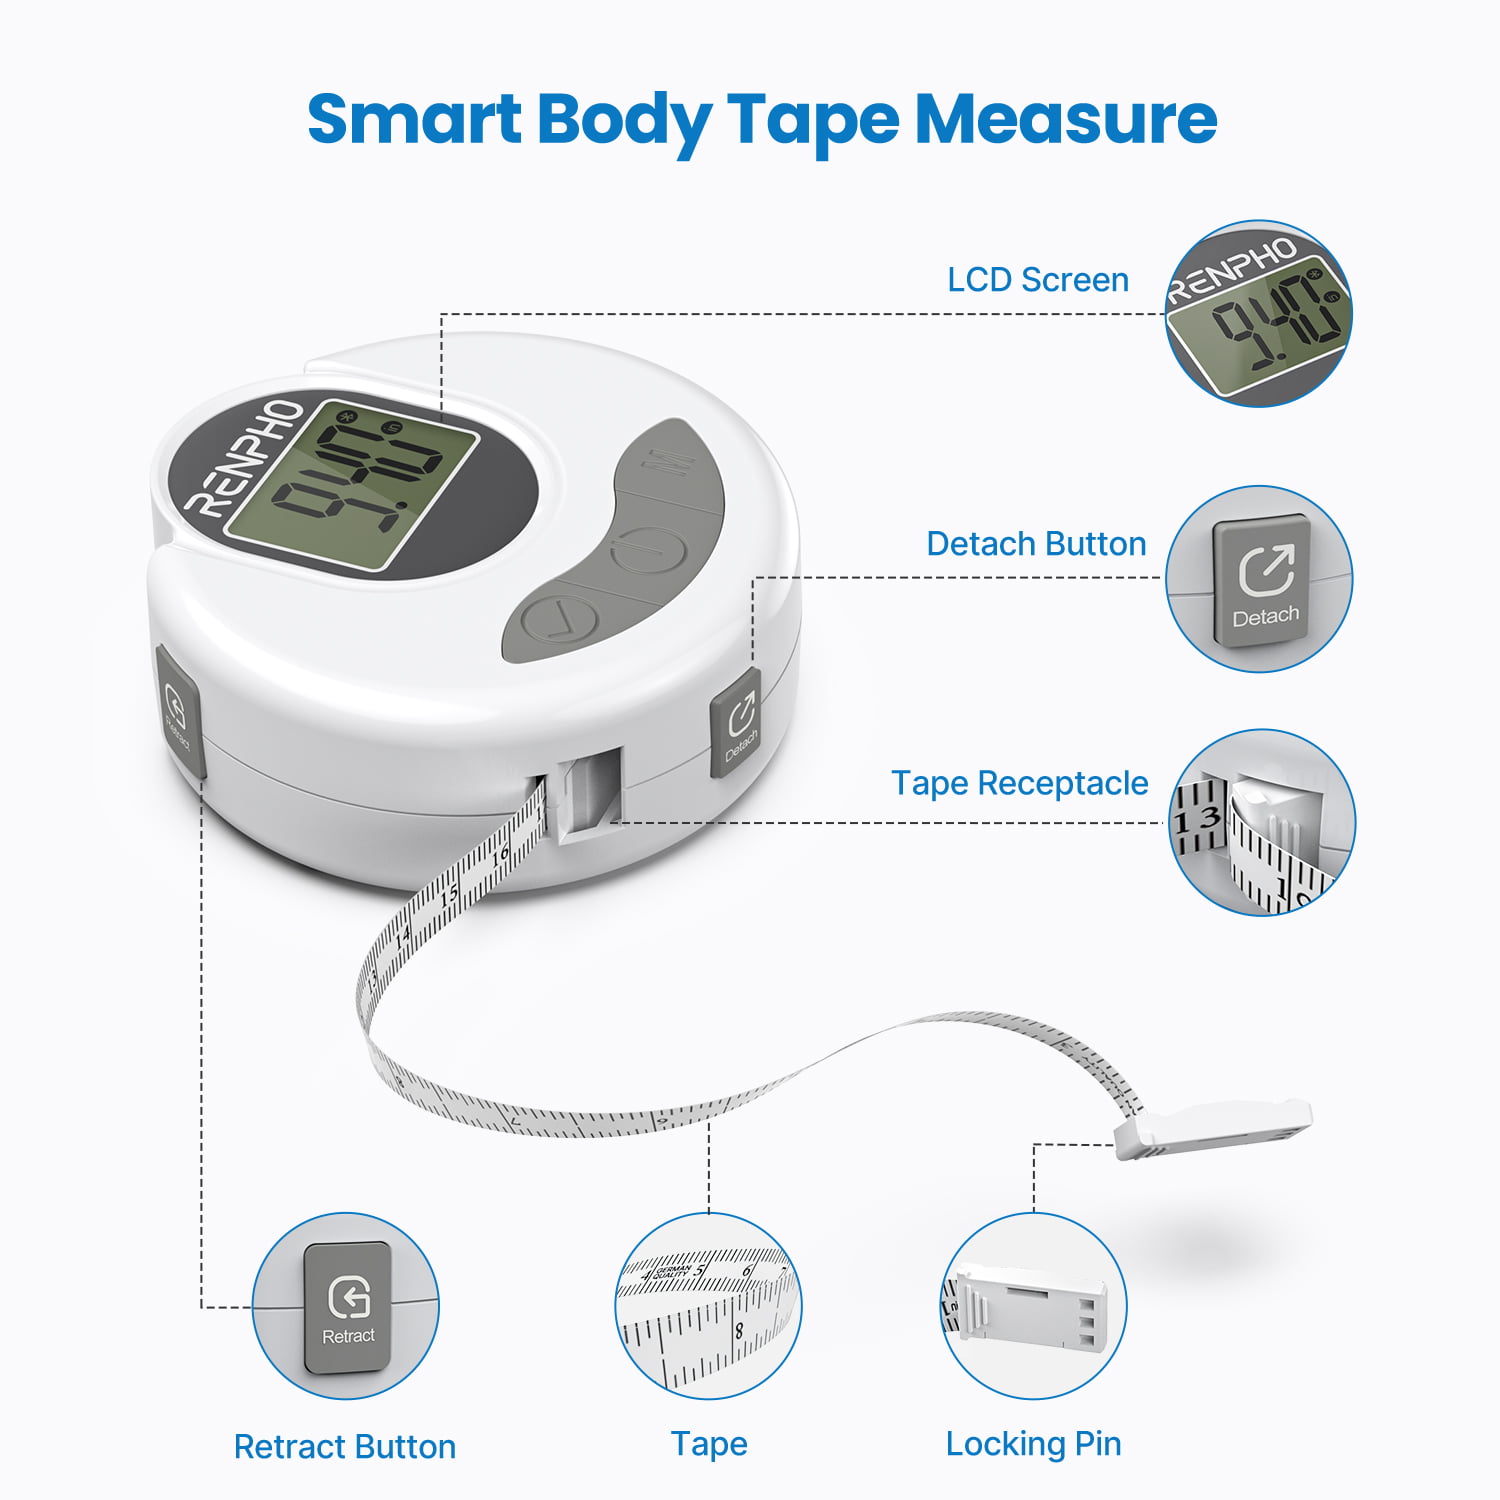 New Renpho Smart Tape Measure for body - health and beauty - by